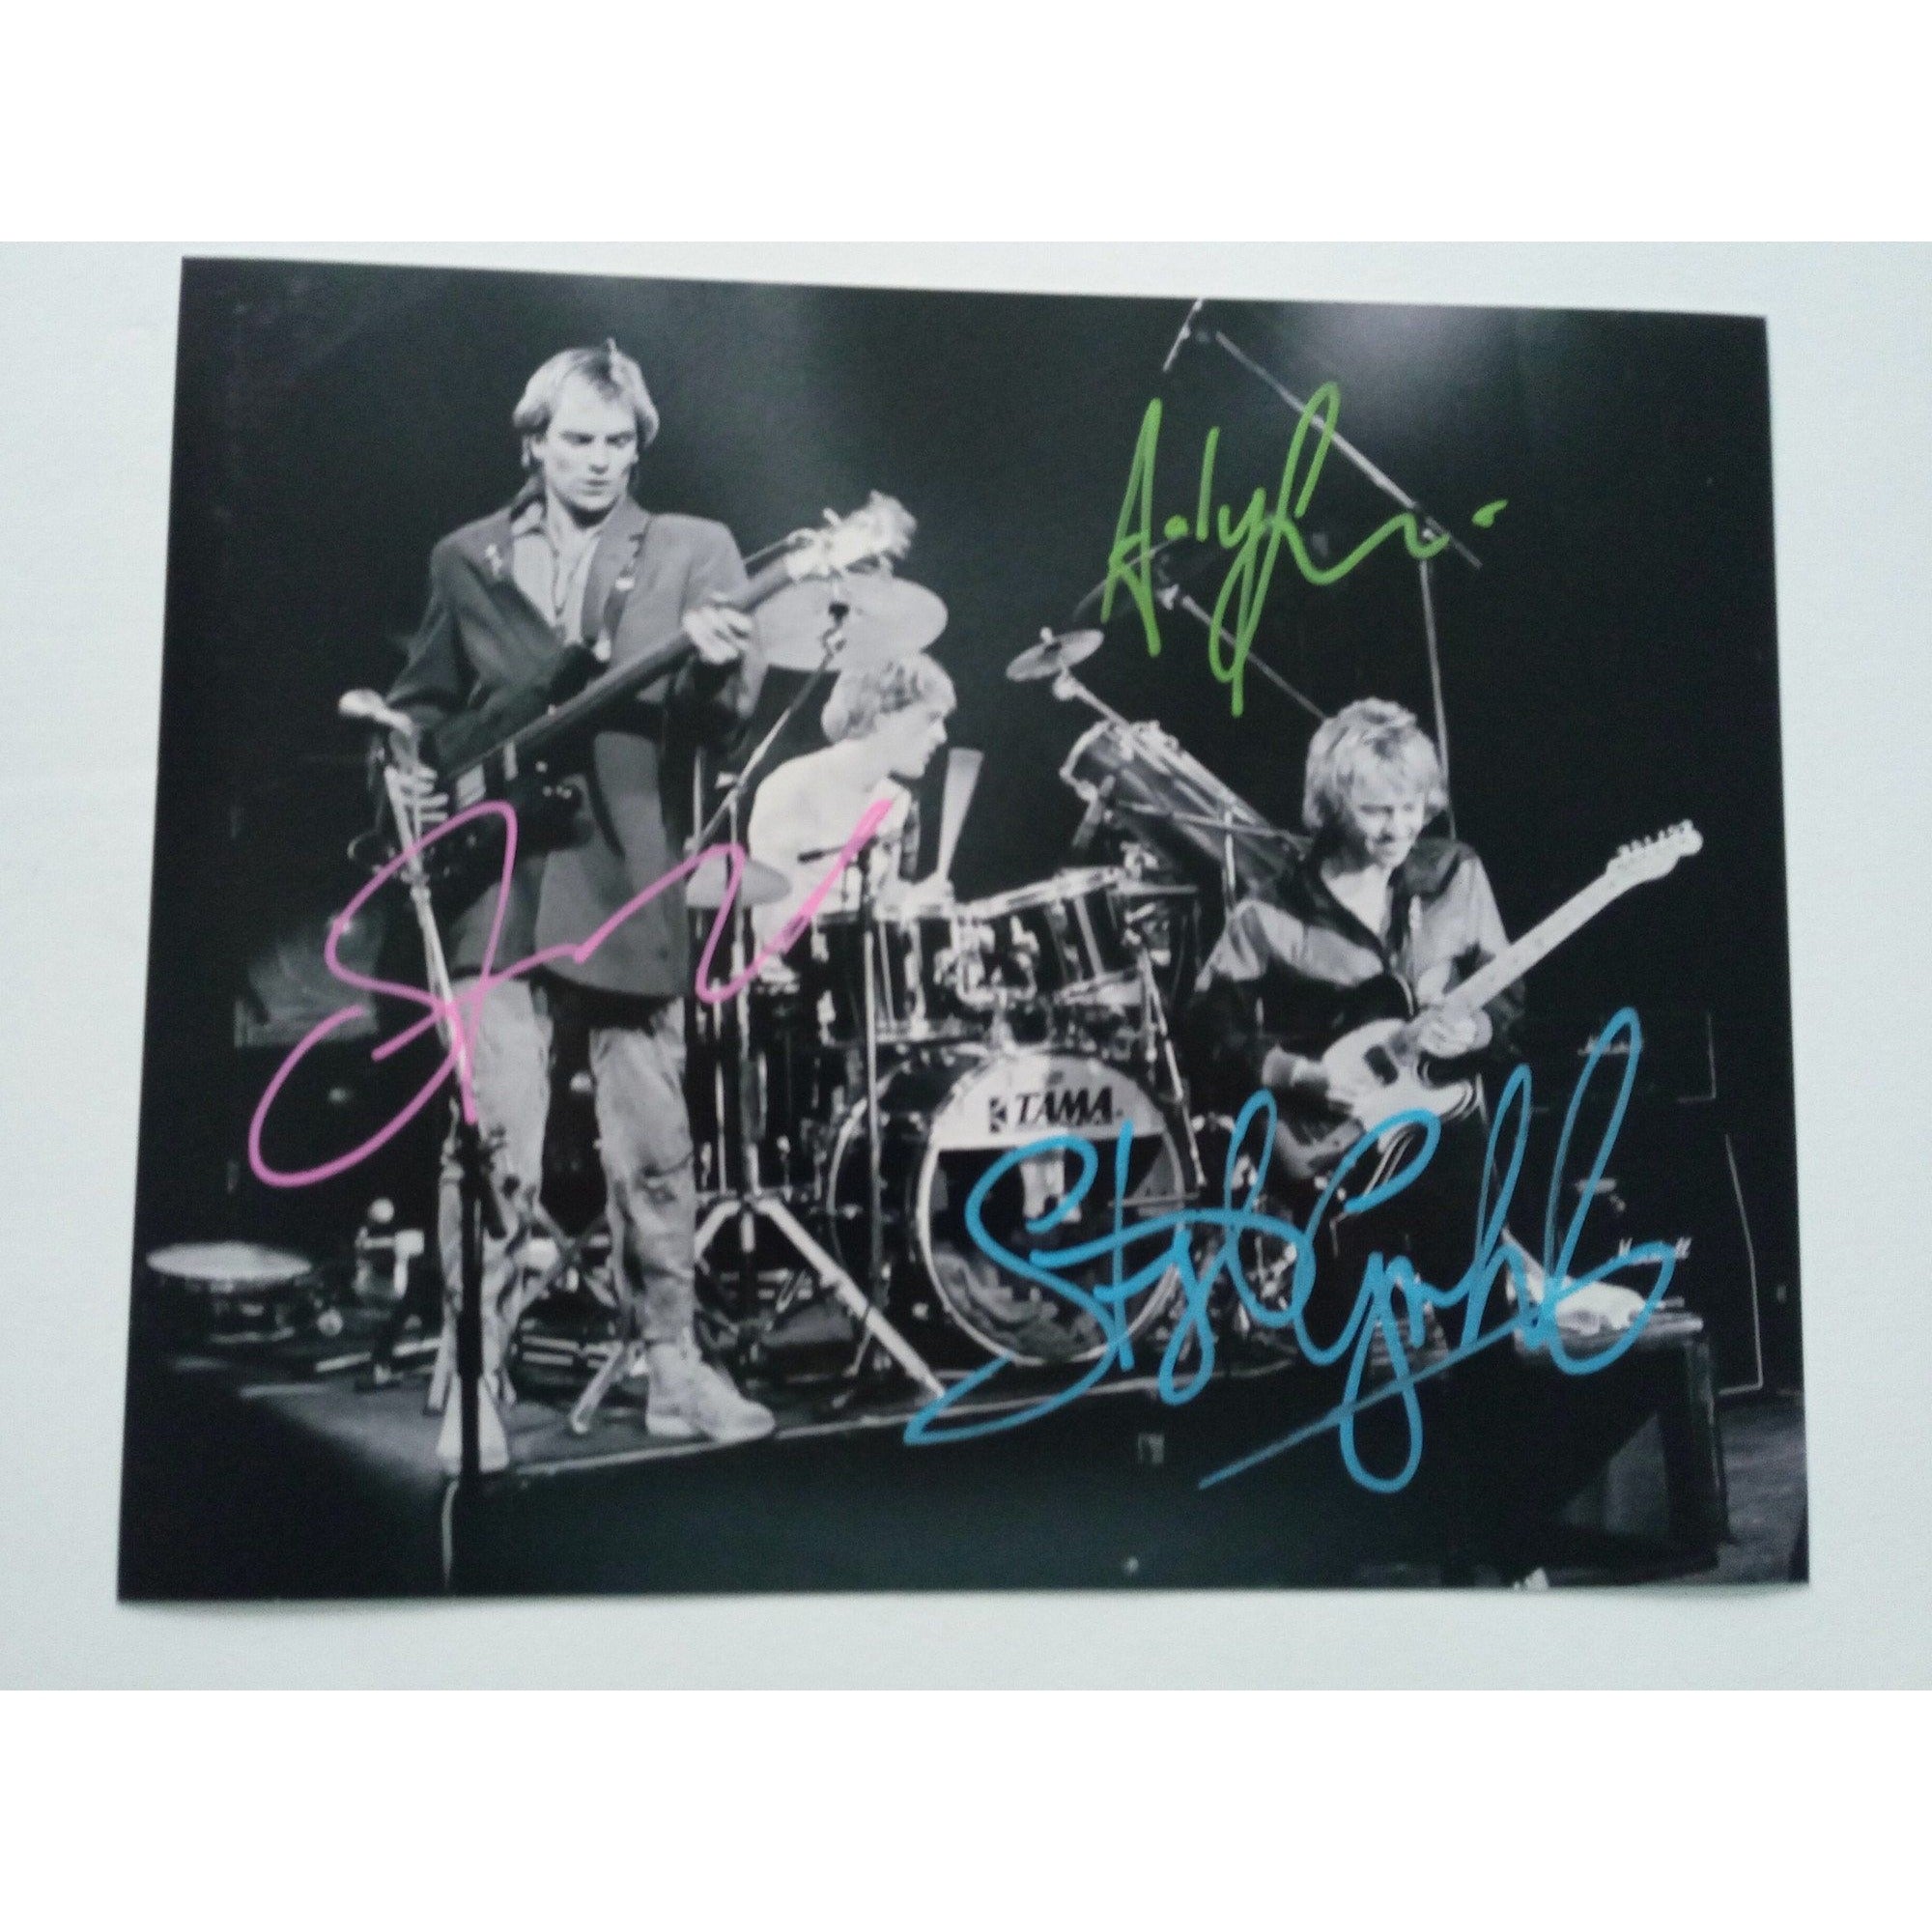 Gordon Sumner, Sting, Stewart Copeland, Andy Summers 8 by 10 signed photo with proof